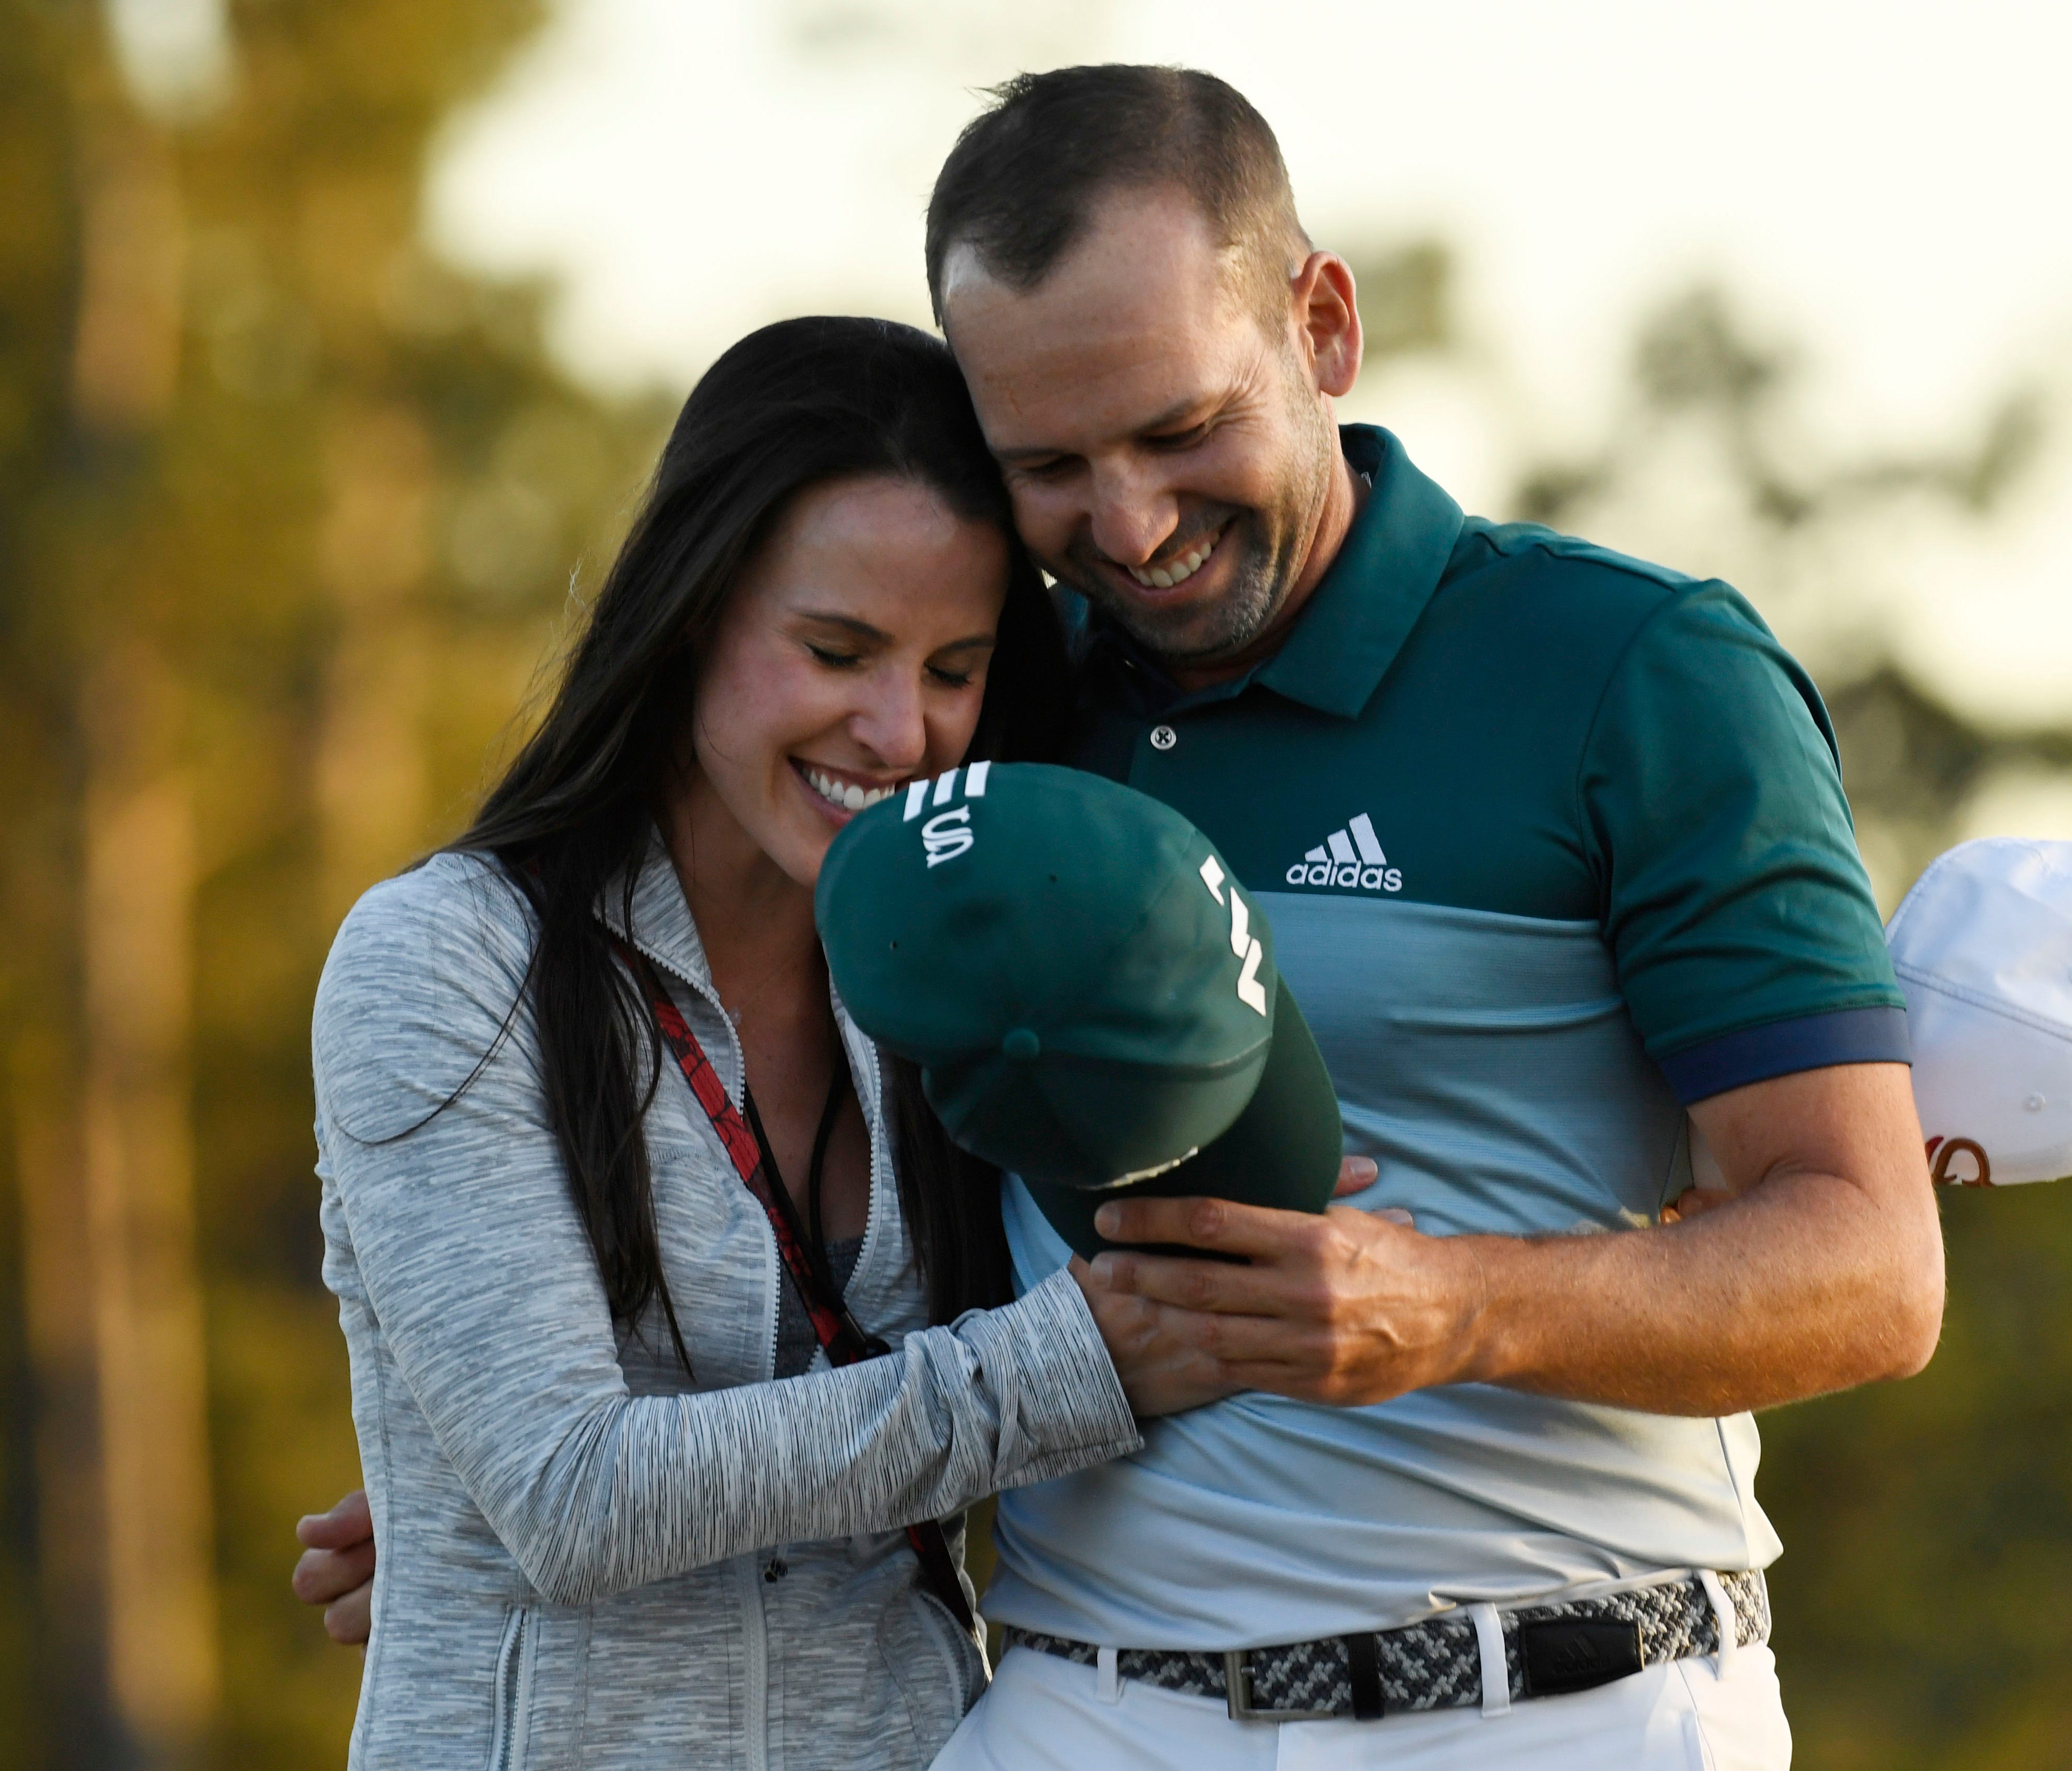 In 2017, Sergio Garcia celebrated with Angela Akins, who is now his wife,  after making a putt on the 18th green during the first playoff hole to win the Masters.